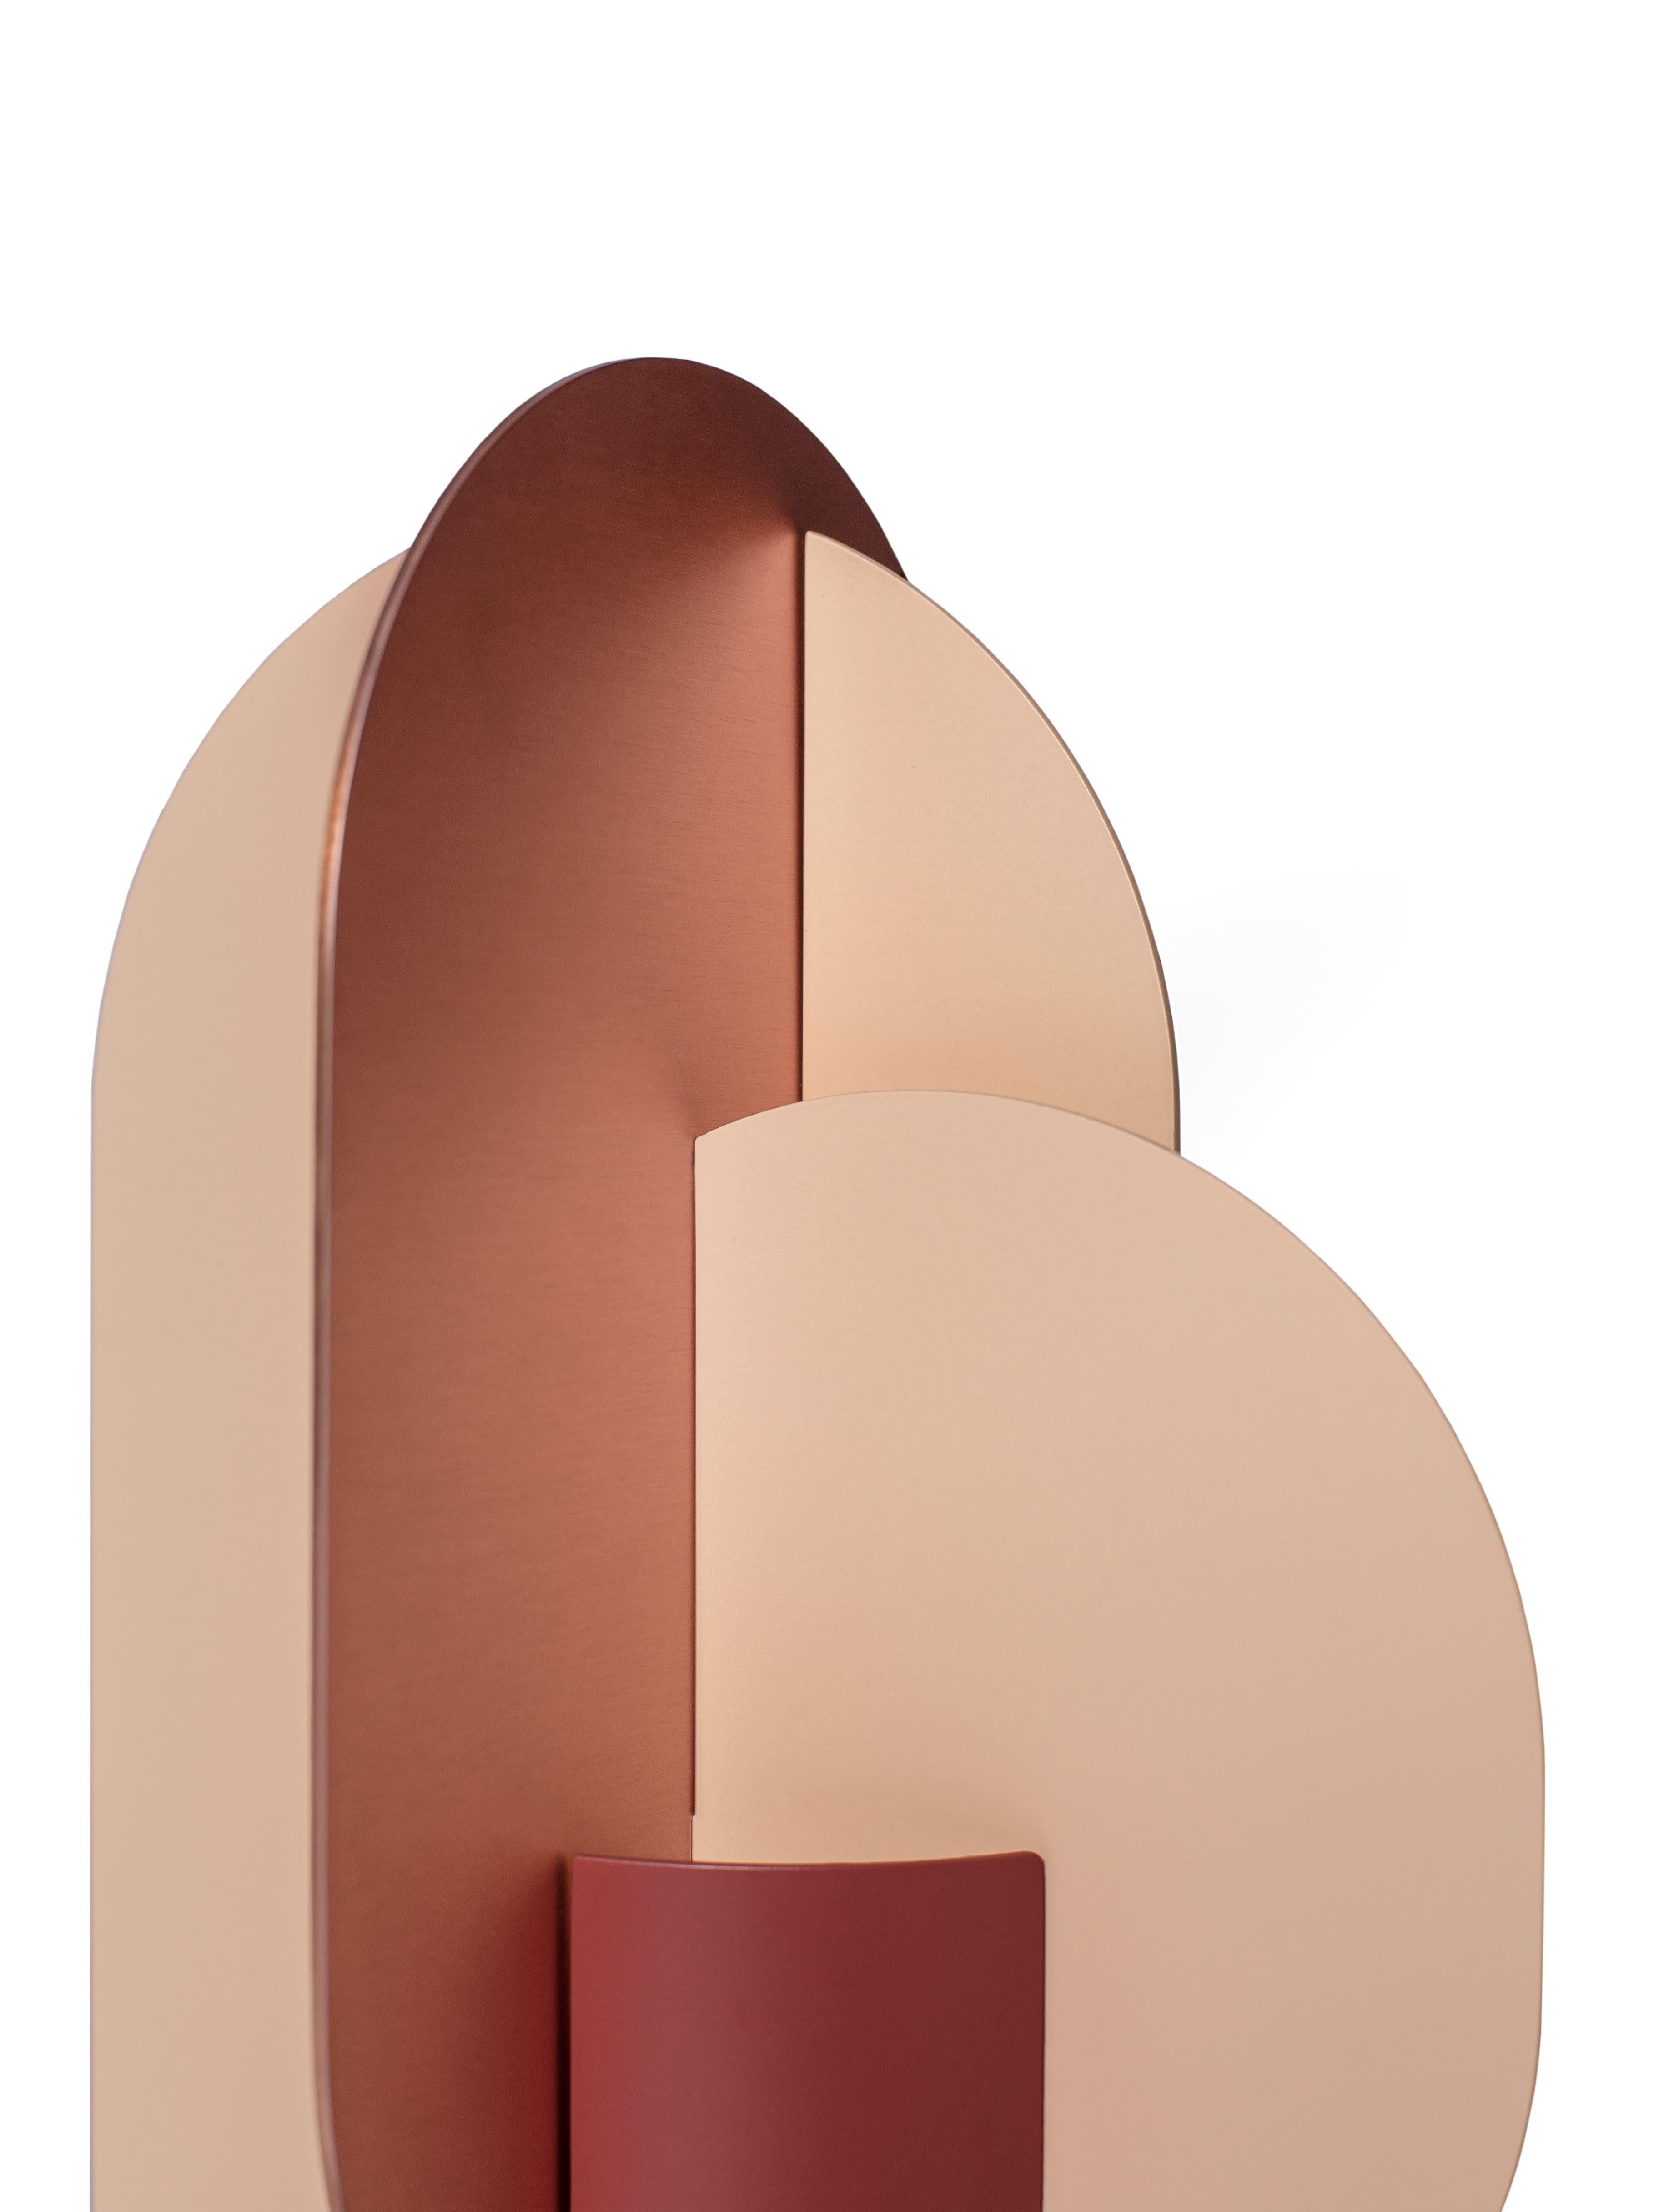 Brushed Contemporary Metal Vase 'Ekster CS7' by Noom, Copper and Steel For Sale